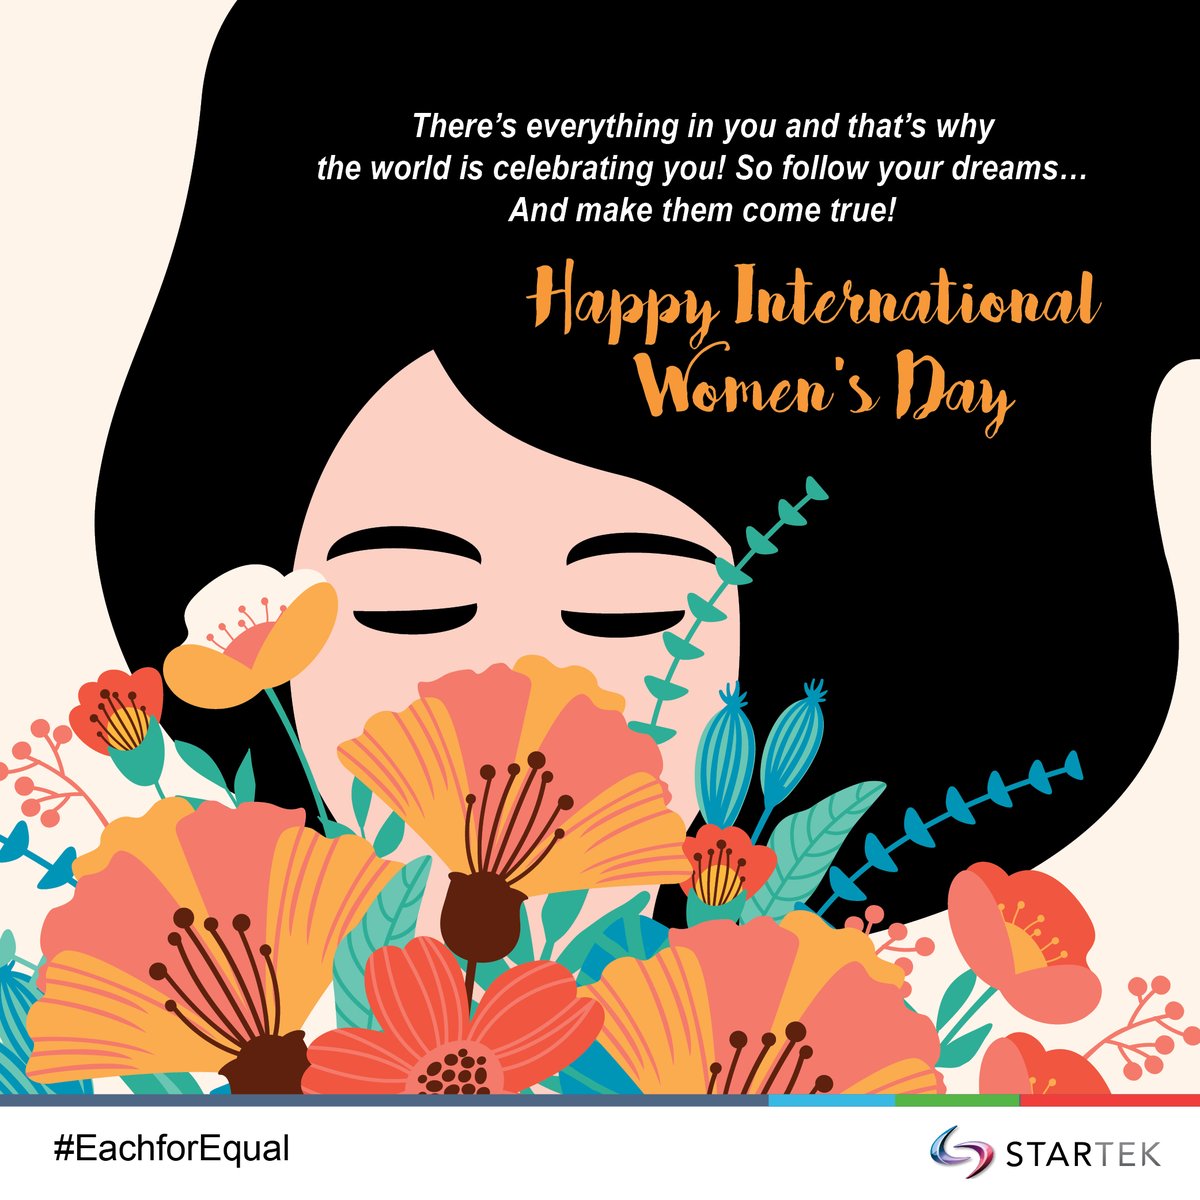 Startek Global On Twitter Cheers To Strong Compassionate Beautiful Unique Powerful Bold Ambitious Women Happy Women S Day Eachforequal Https T Co Nnihsnx8tn Find images of women's day. twitter